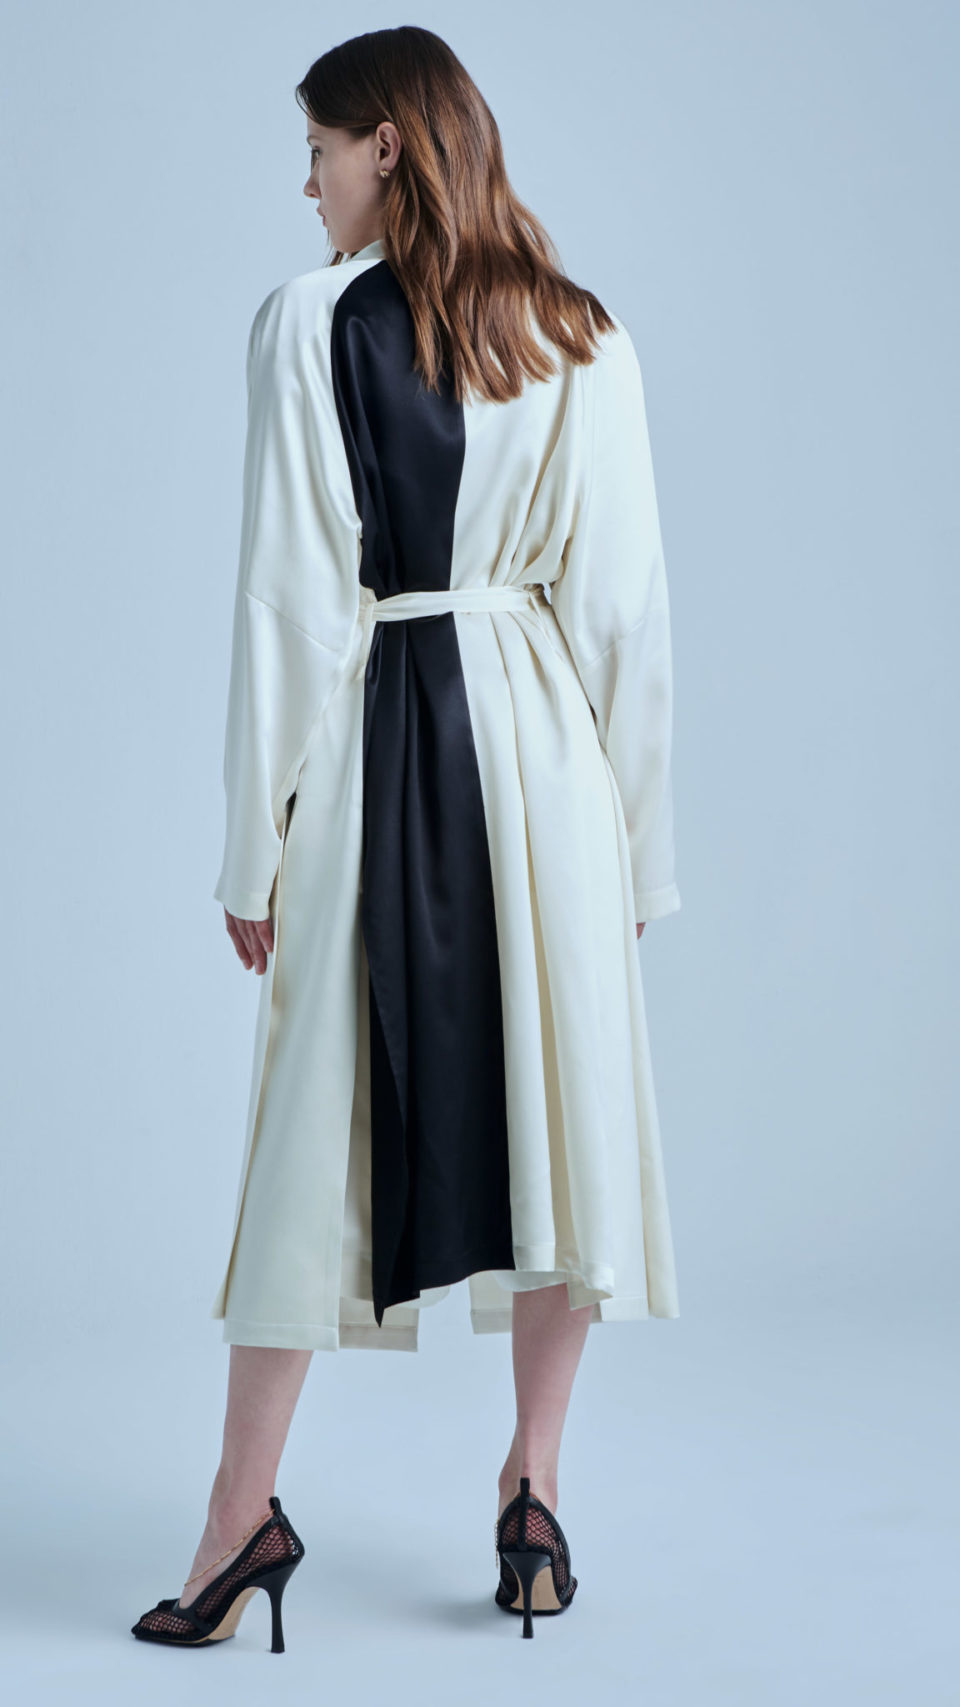 Luxurious silk night gown from MAR by Maria Karimi